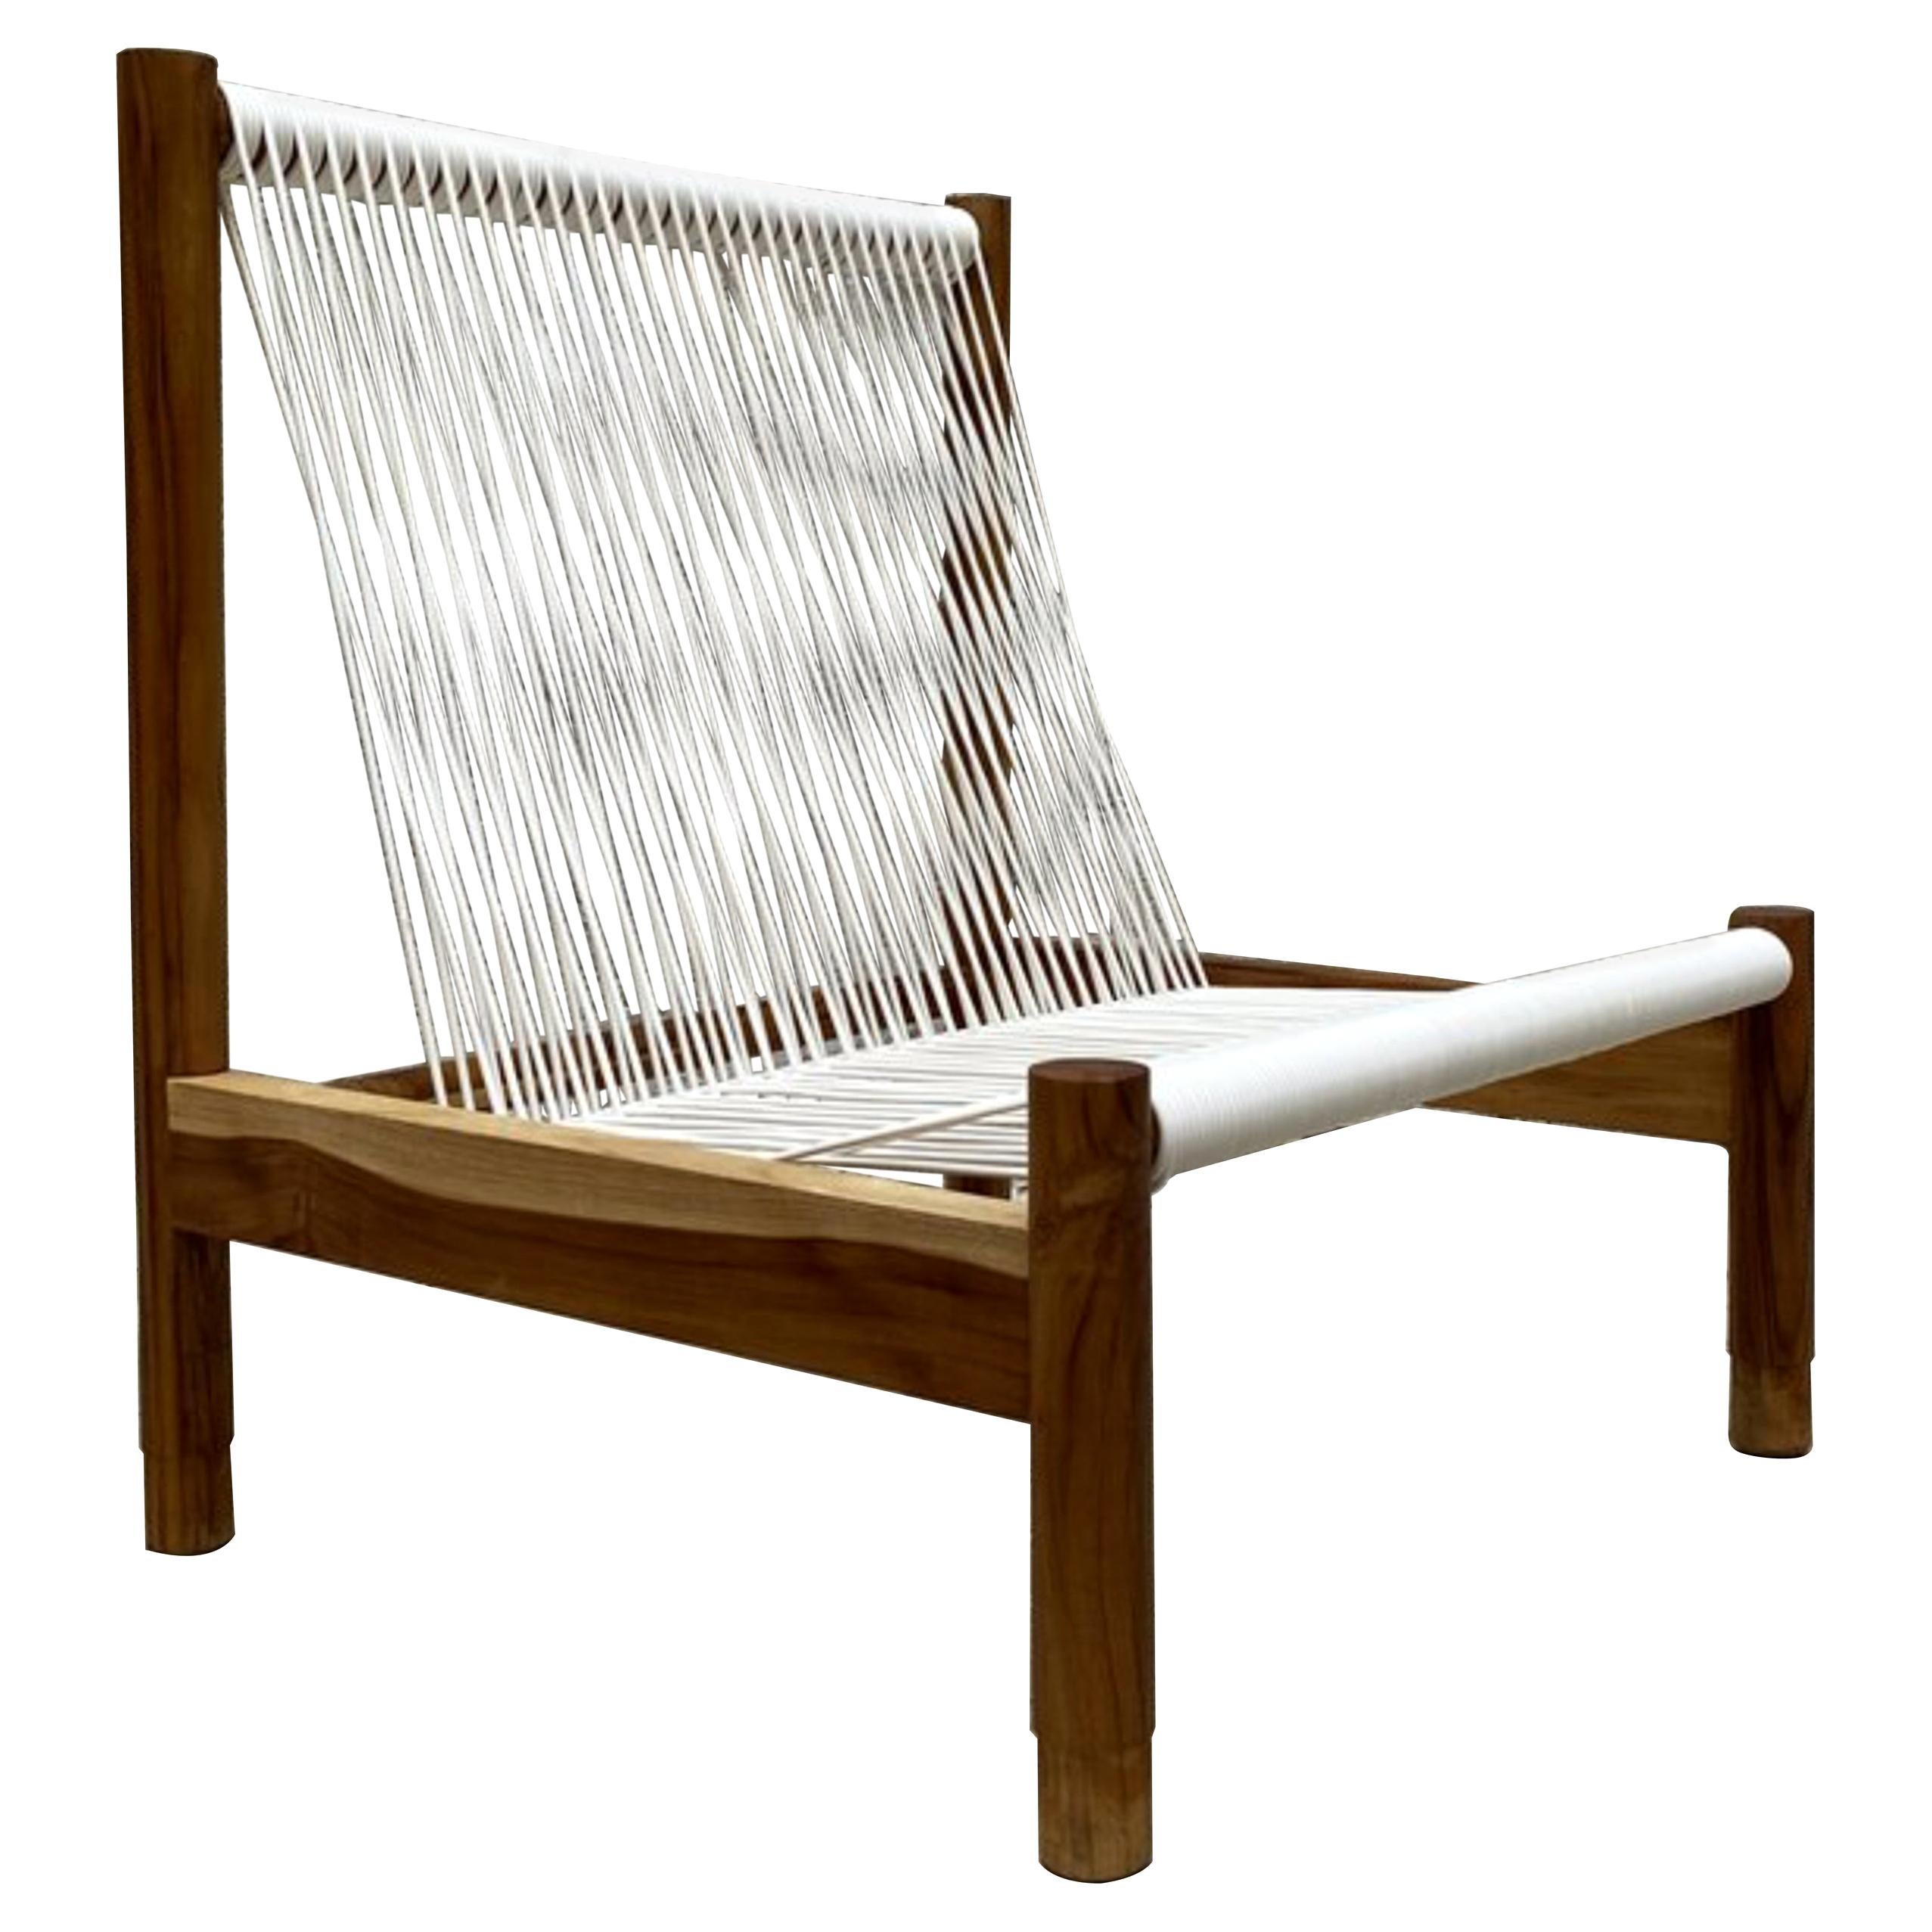 Al Sol Outdoor Chair, Maria Beckmann, Represented by Tuleste Factory